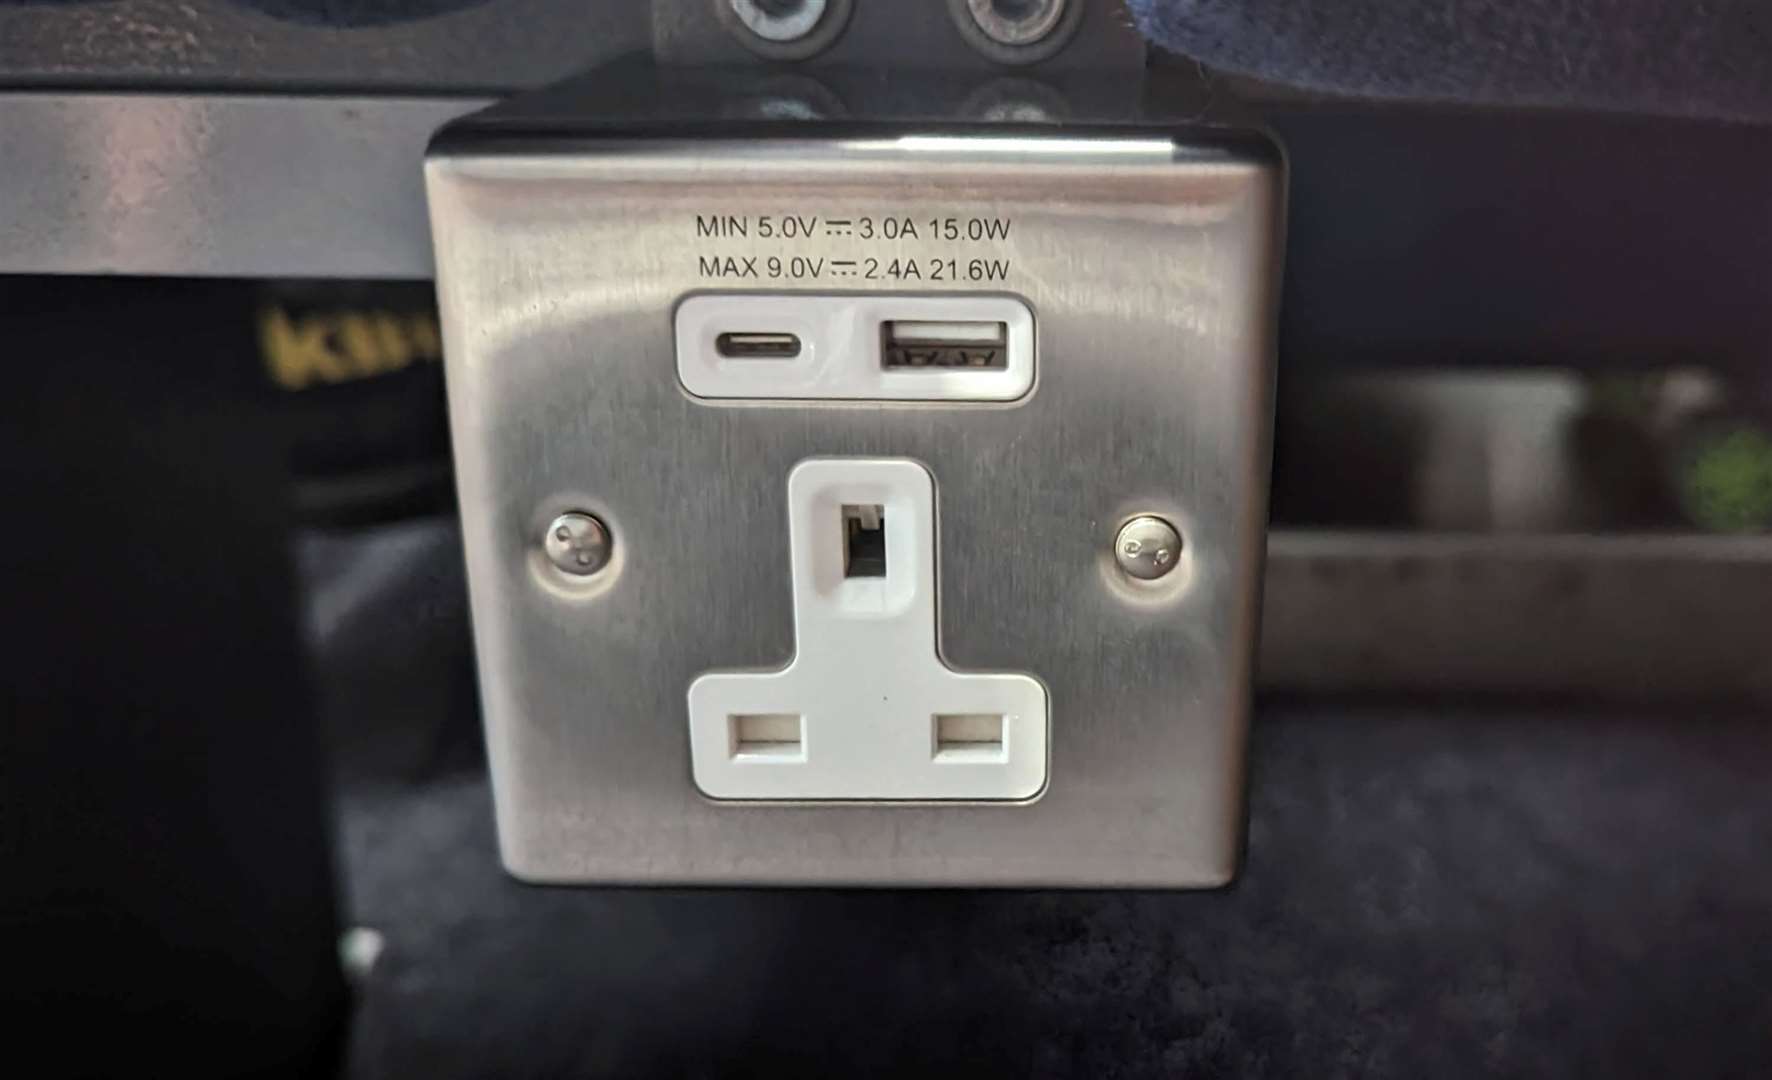 The addition of USB charging points between seats will be a welcome upgrade for passengers